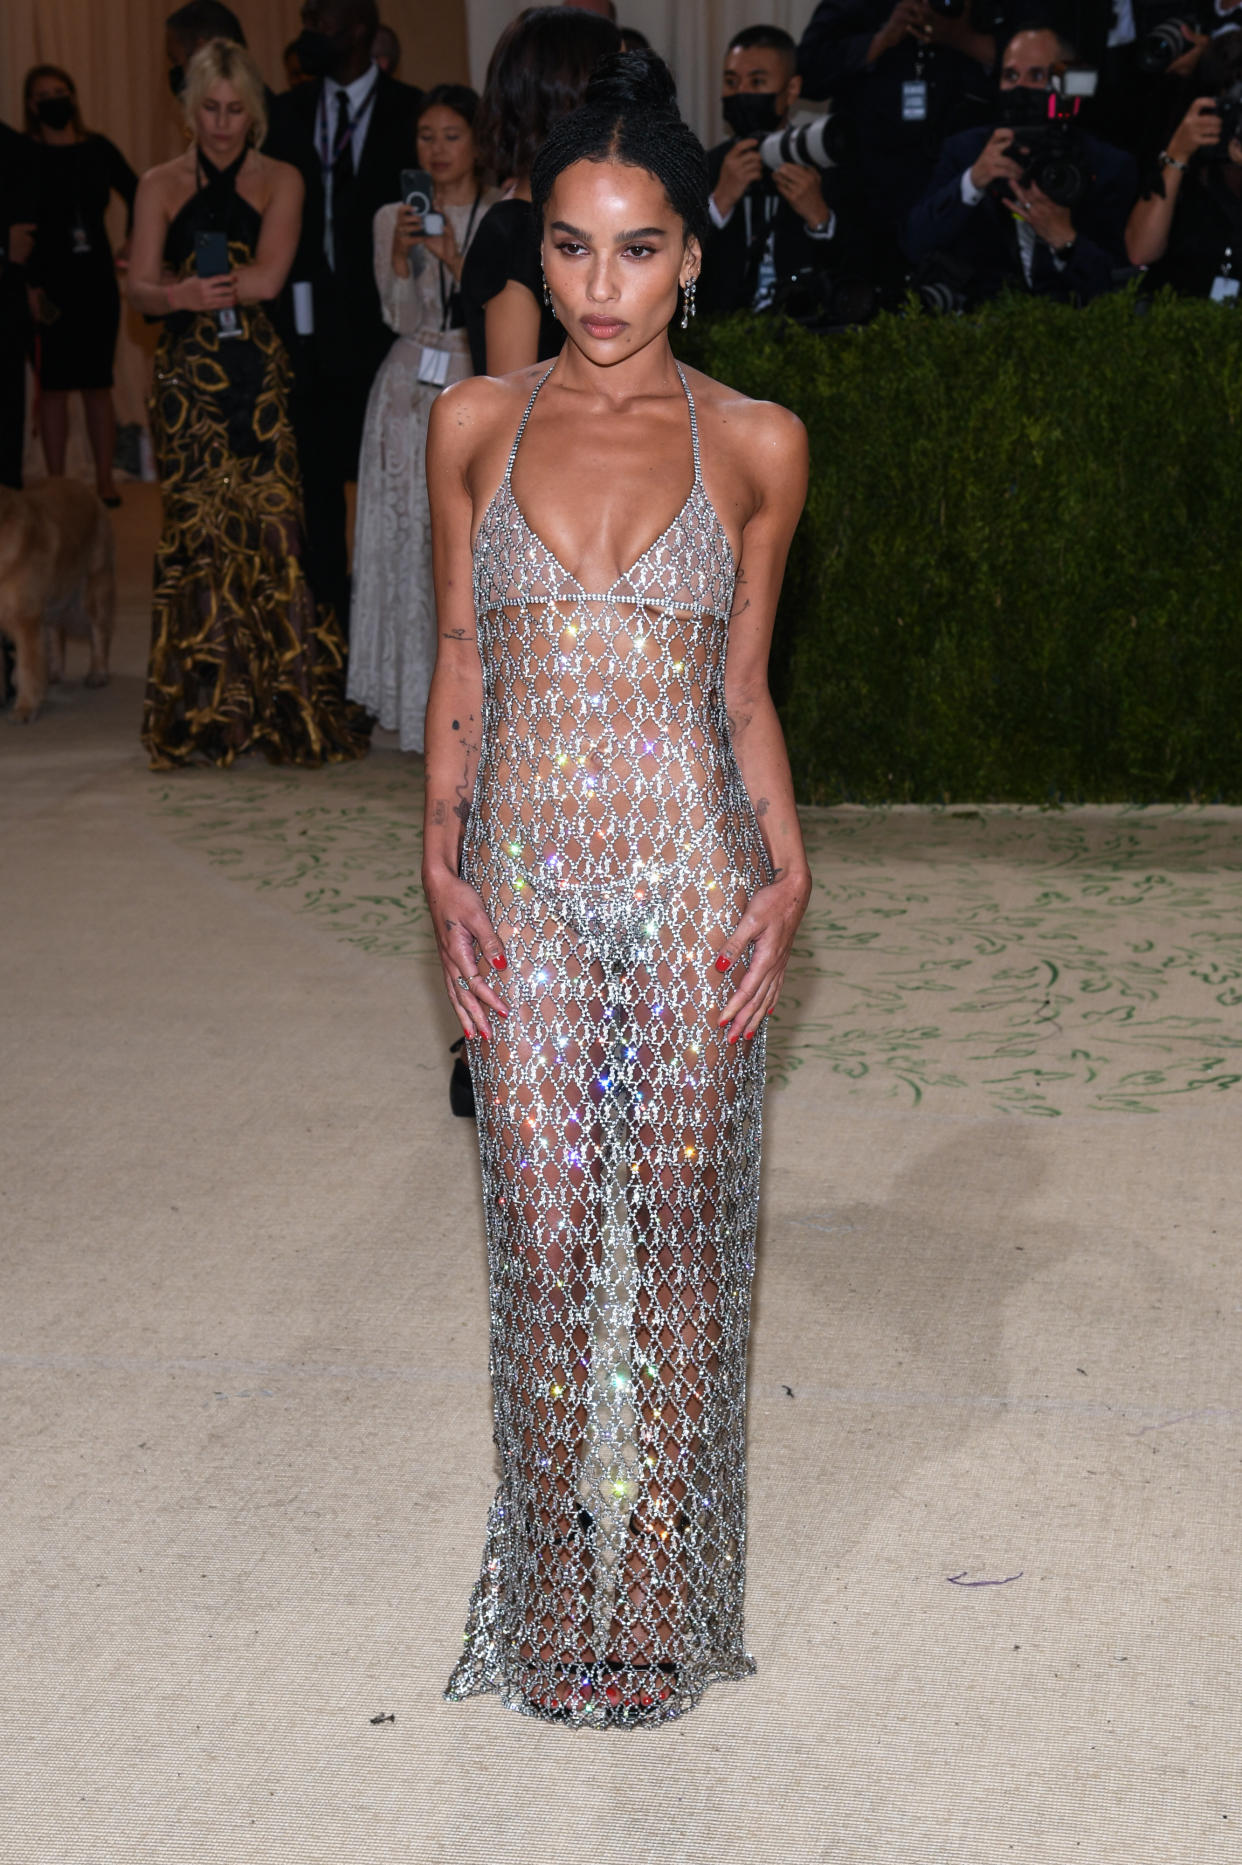 Zo� Kravitz walking on the red carpet at the 2021 Metropolitan Museum of Art Costume Institute Gala celebrating the opening of the exhibition titled In America: A Lexicon of Fashion held at the Metropolitan Museum of Art in New York, NY on September 13, 2021. (Photo by Anthony Behar/Sipa USA)